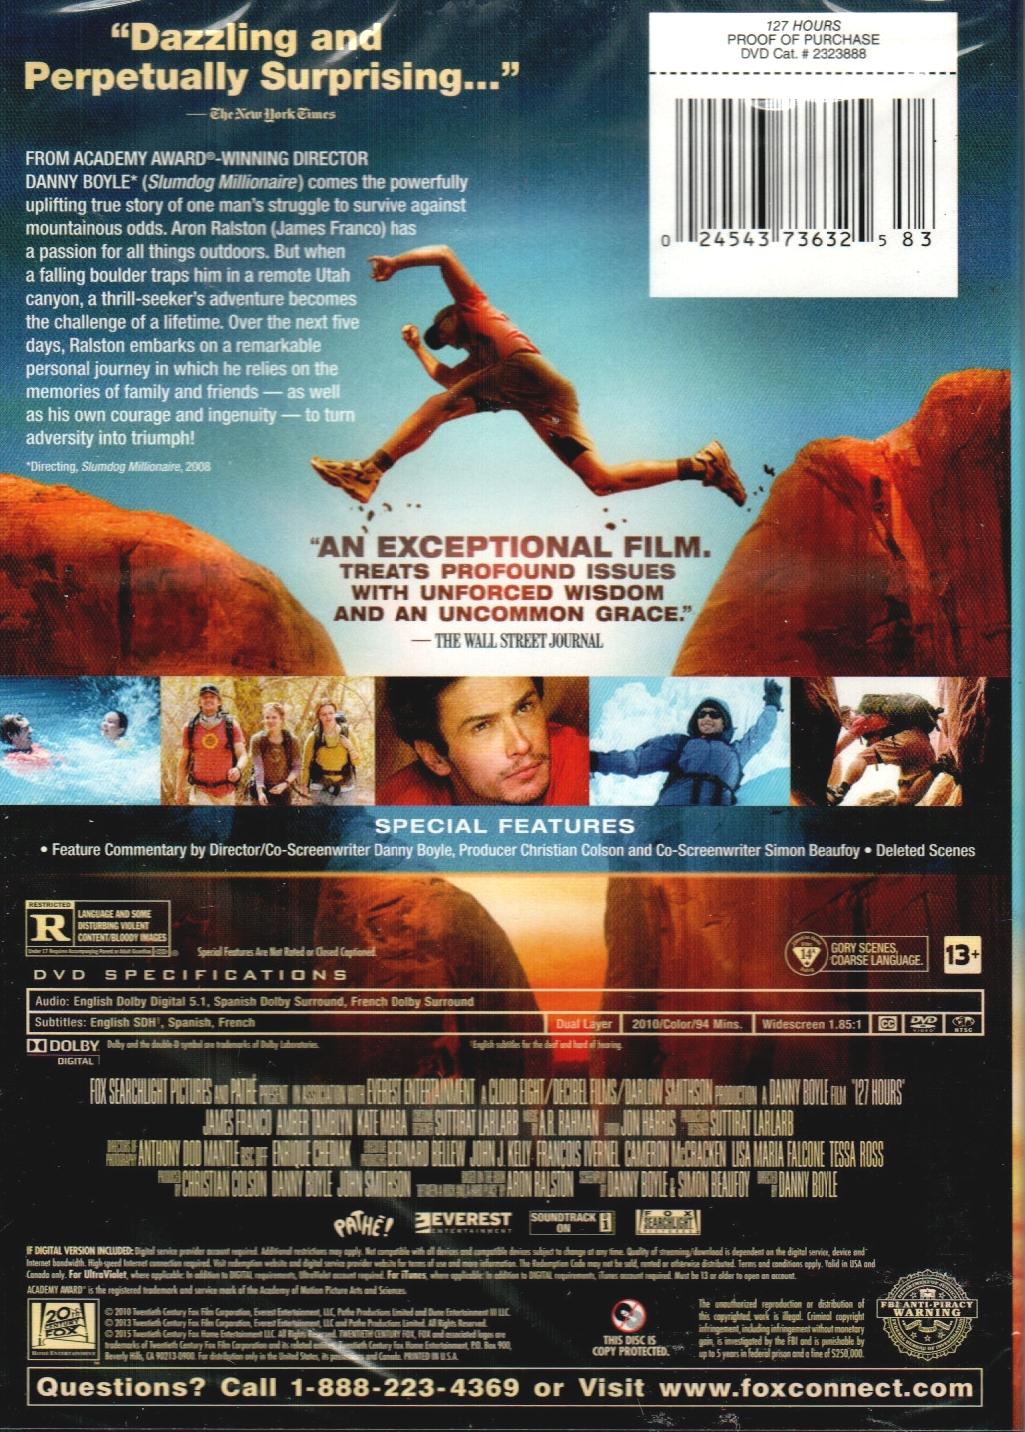 127 Hours (DVD) - image 2 of 2